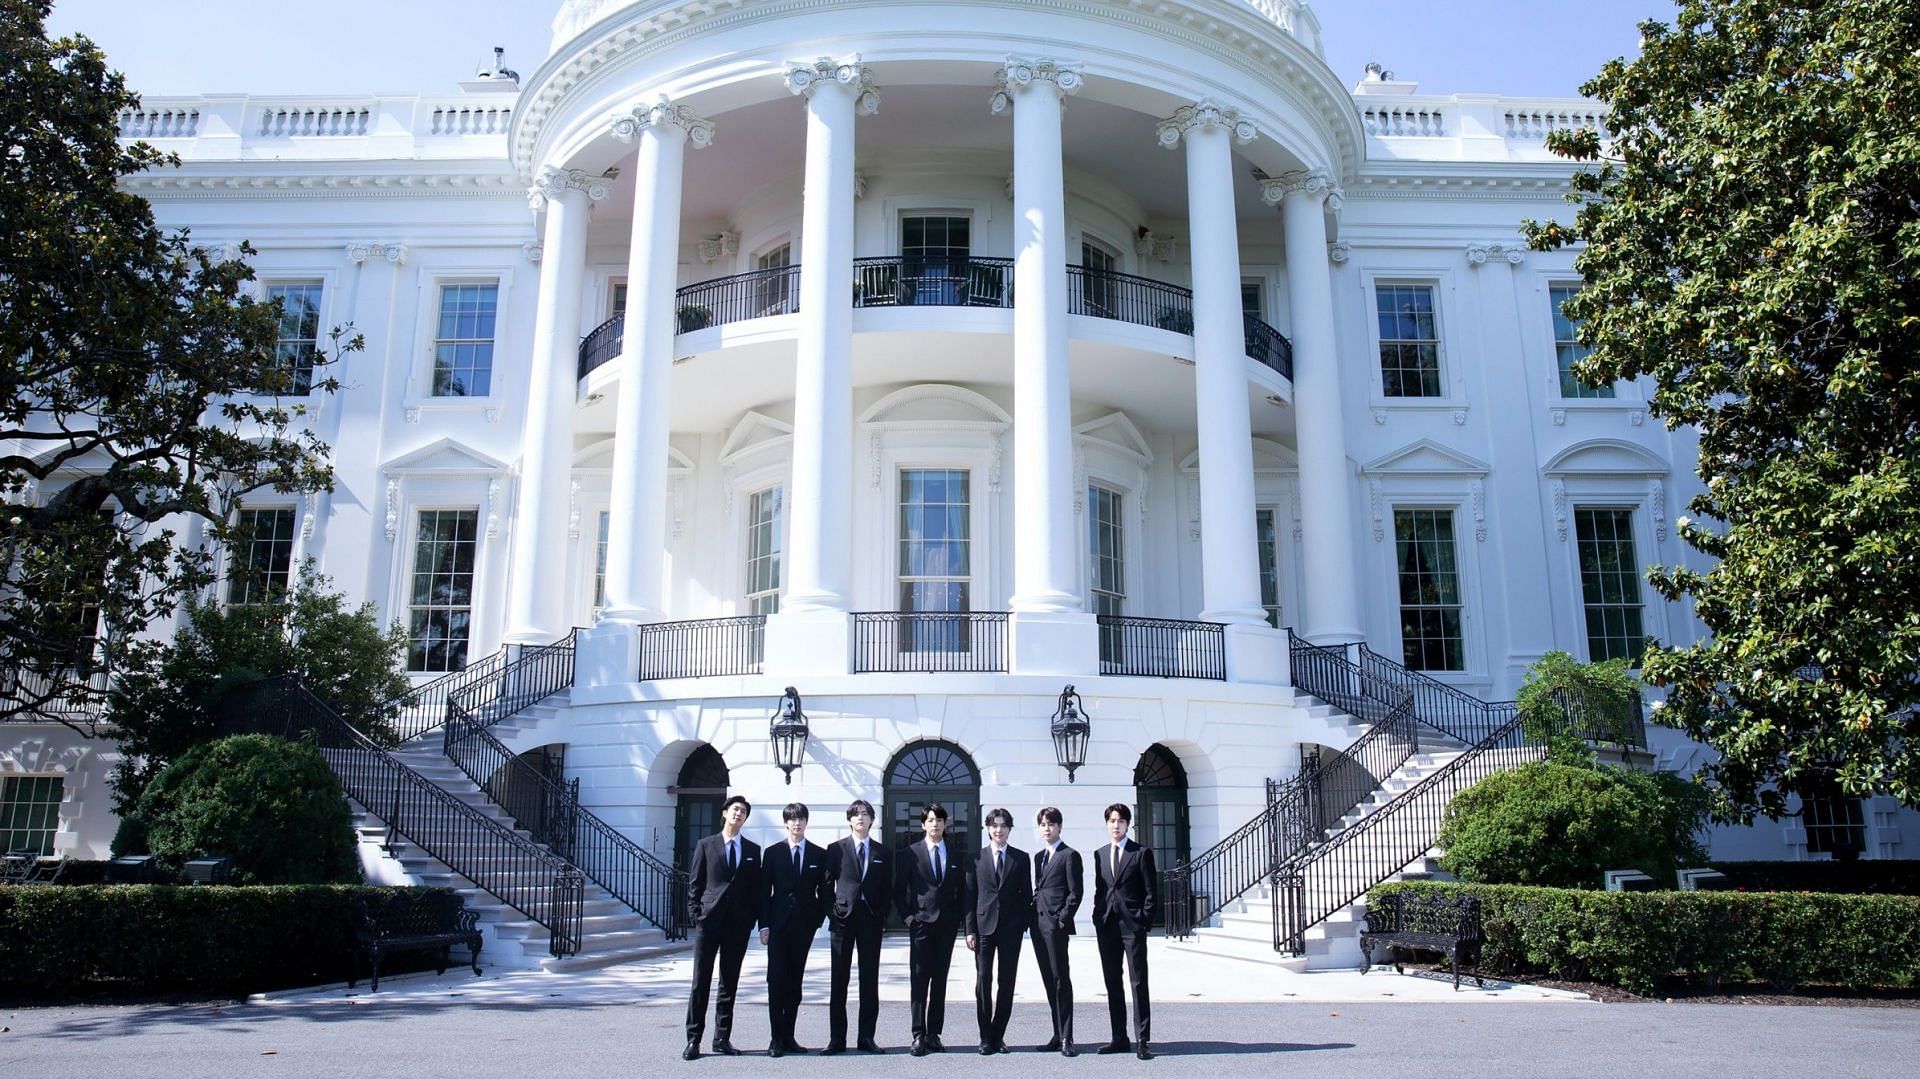 The group paid a visit to the White House (Image via BigHit)